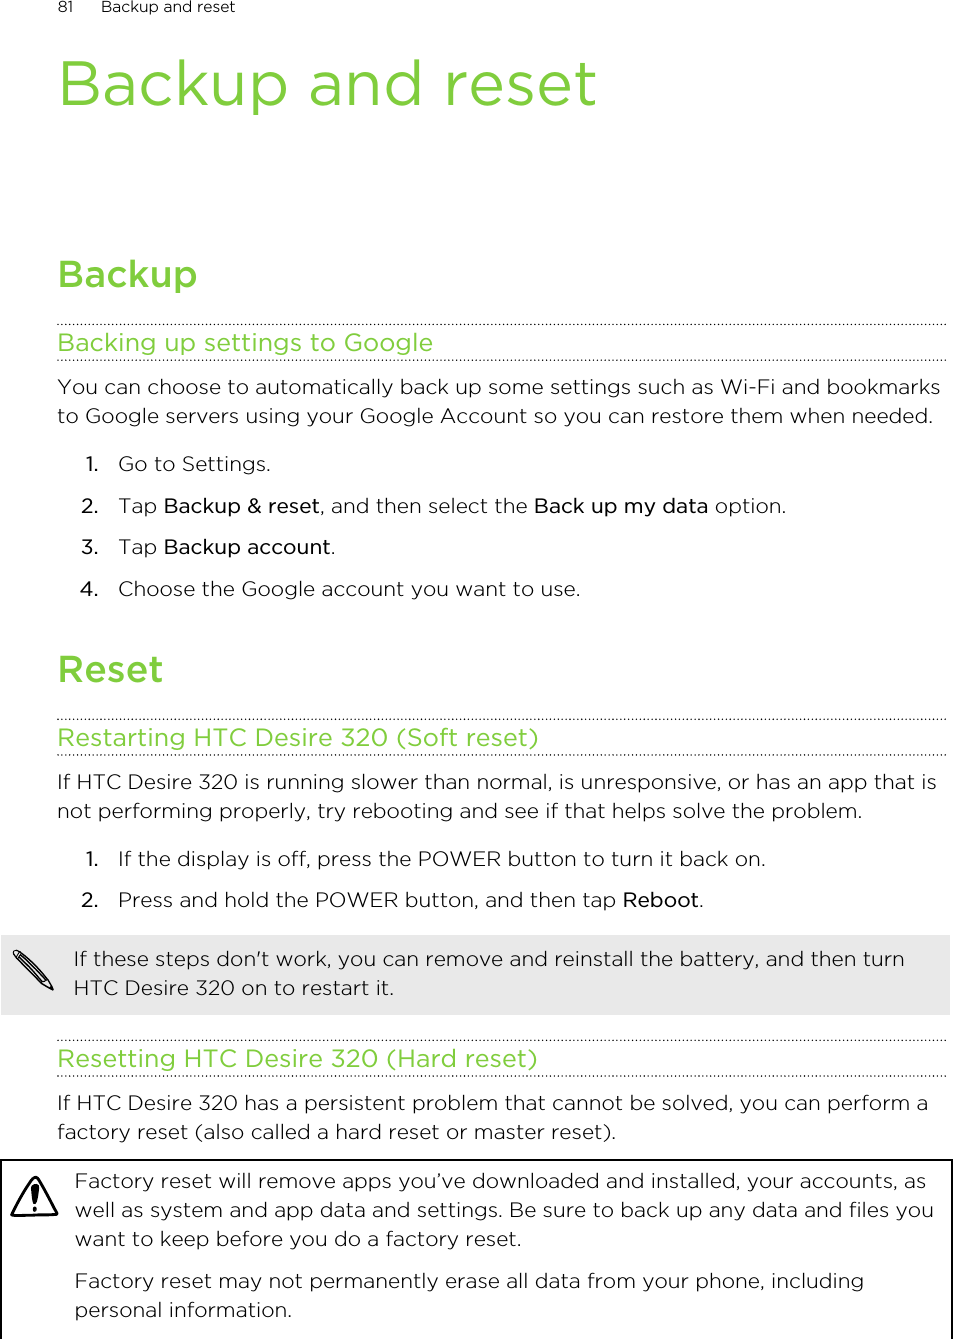 Backup and resetBackupBacking up settings to GoogleYou can choose to automatically back up some settings such as Wi-Fi and bookmarksto Google servers using your Google Account so you can restore them when needed.1. Go to Settings.2. Tap Backup &amp; reset, and then select the Back up my data option.3. Tap Backup account.4. Choose the Google account you want to use.ResetRestarting HTC Desire 320 (Soft reset)If HTC Desire 320 is running slower than normal, is unresponsive, or has an app that isnot performing properly, try rebooting and see if that helps solve the problem.1. If the display is off, press the POWER button to turn it back on.2. Press and hold the POWER button, and then tap Reboot.If these steps don&apos;t work, you can remove and reinstall the battery, and then turnHTC Desire 320 on to restart it.Resetting HTC Desire 320 (Hard reset)If HTC Desire 320 has a persistent problem that cannot be solved, you can perform afactory reset (also called a hard reset or master reset).Factory reset will remove apps you’ve downloaded and installed, your accounts, aswell as system and app data and settings. Be sure to back up any data and files youwant to keep before you do a factory reset.Factory reset may not permanently erase all data from your phone, includingpersonal information.81 Backup and reset